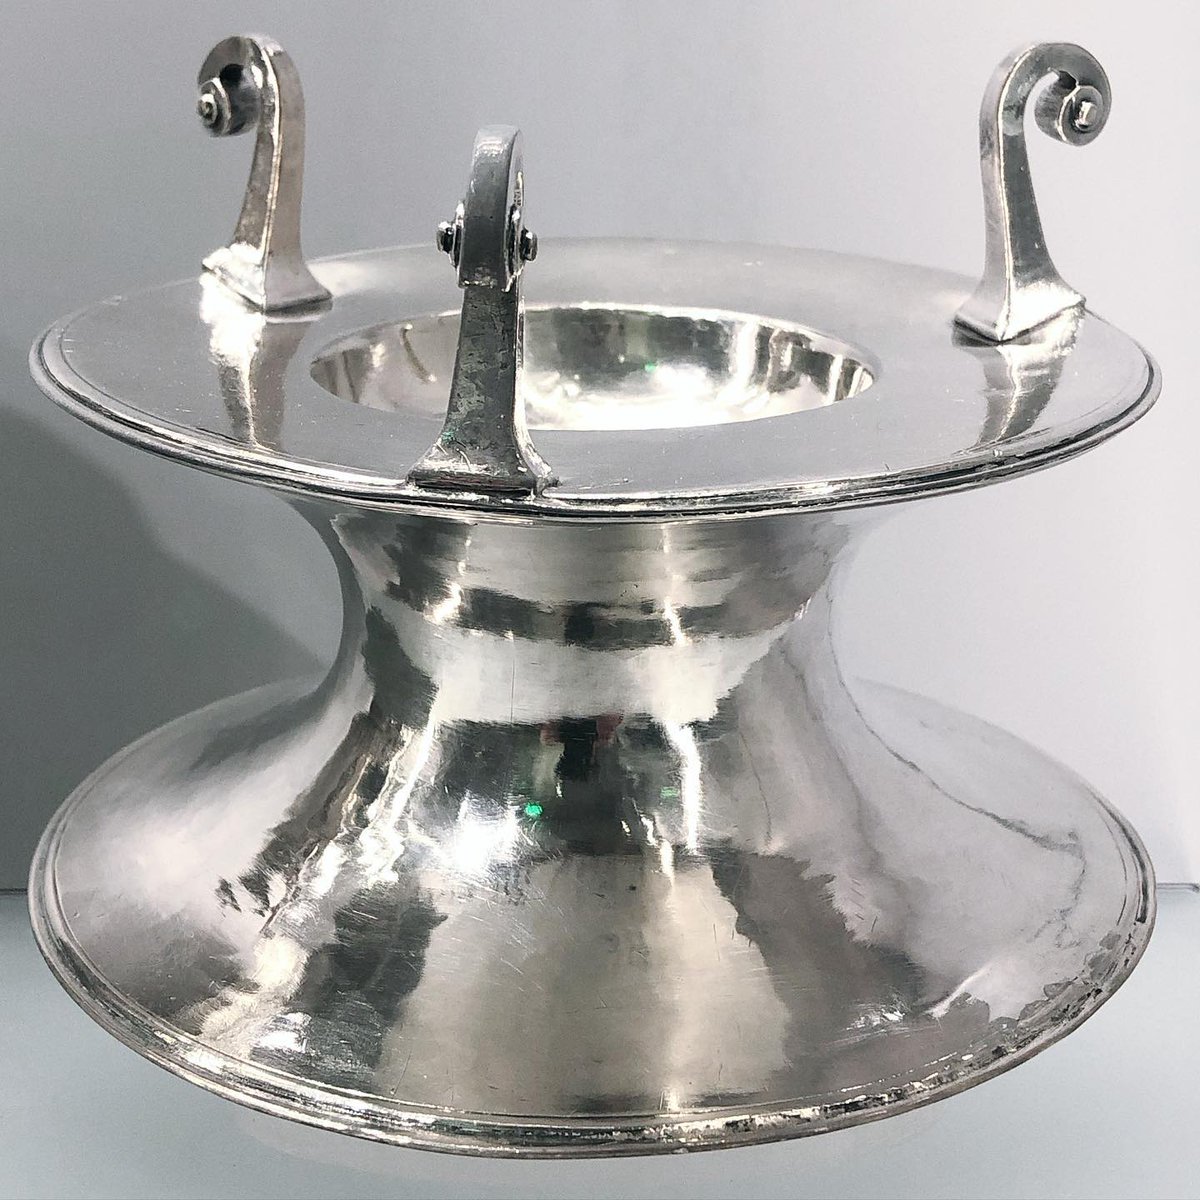 The 'Great Salt,' a London-made saltcellar brought to Massachusetts by Elizabeth Harris Glover (1602-1643), widow of the Reverend Jose Glover (circa 1594-1638). She donated it + her late husband’s printing press— the first in the English colonies— to Harvard. #VastEarlyAmerica